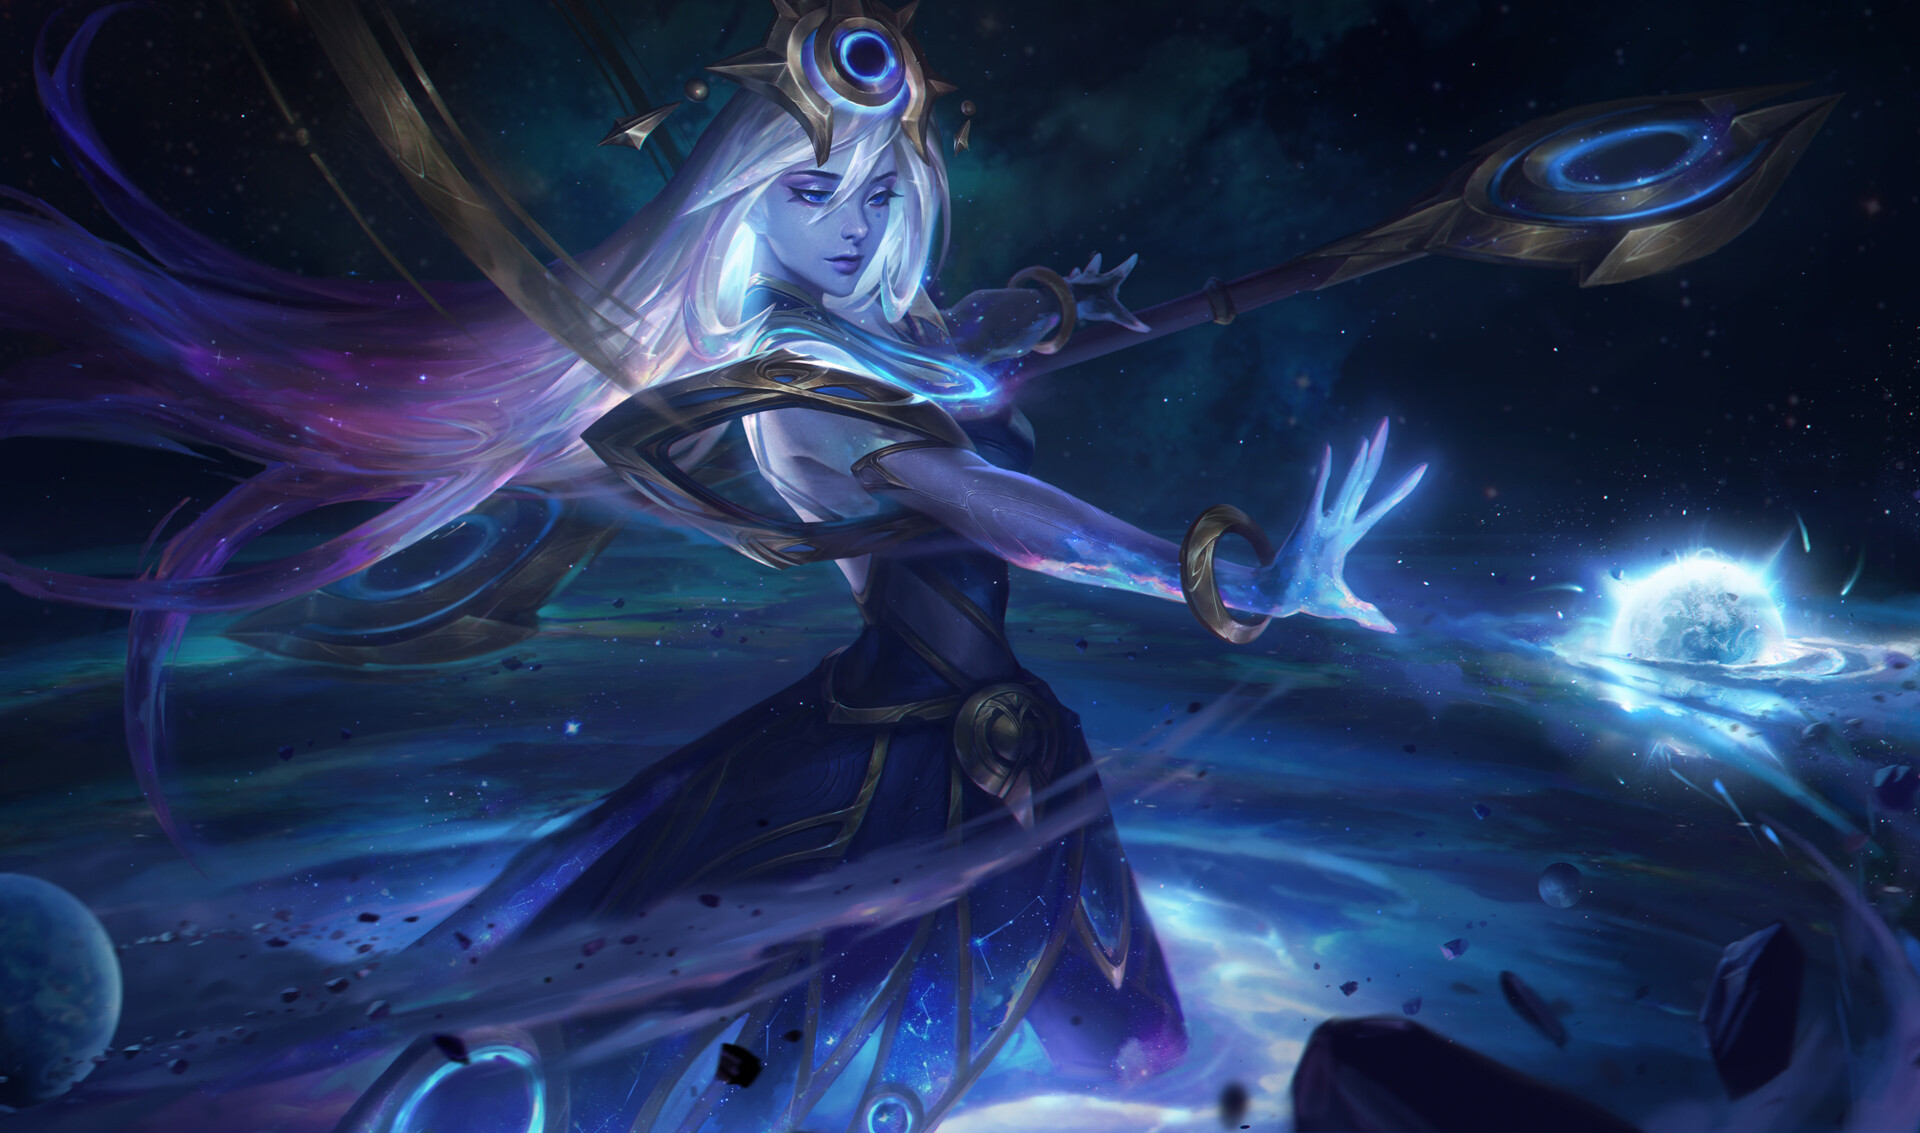 Bo Chen Drawing Women Tiaras Void Staff Magician Stars Space Planet Rocks Long Hair Glowing Spell Or 1920x1133